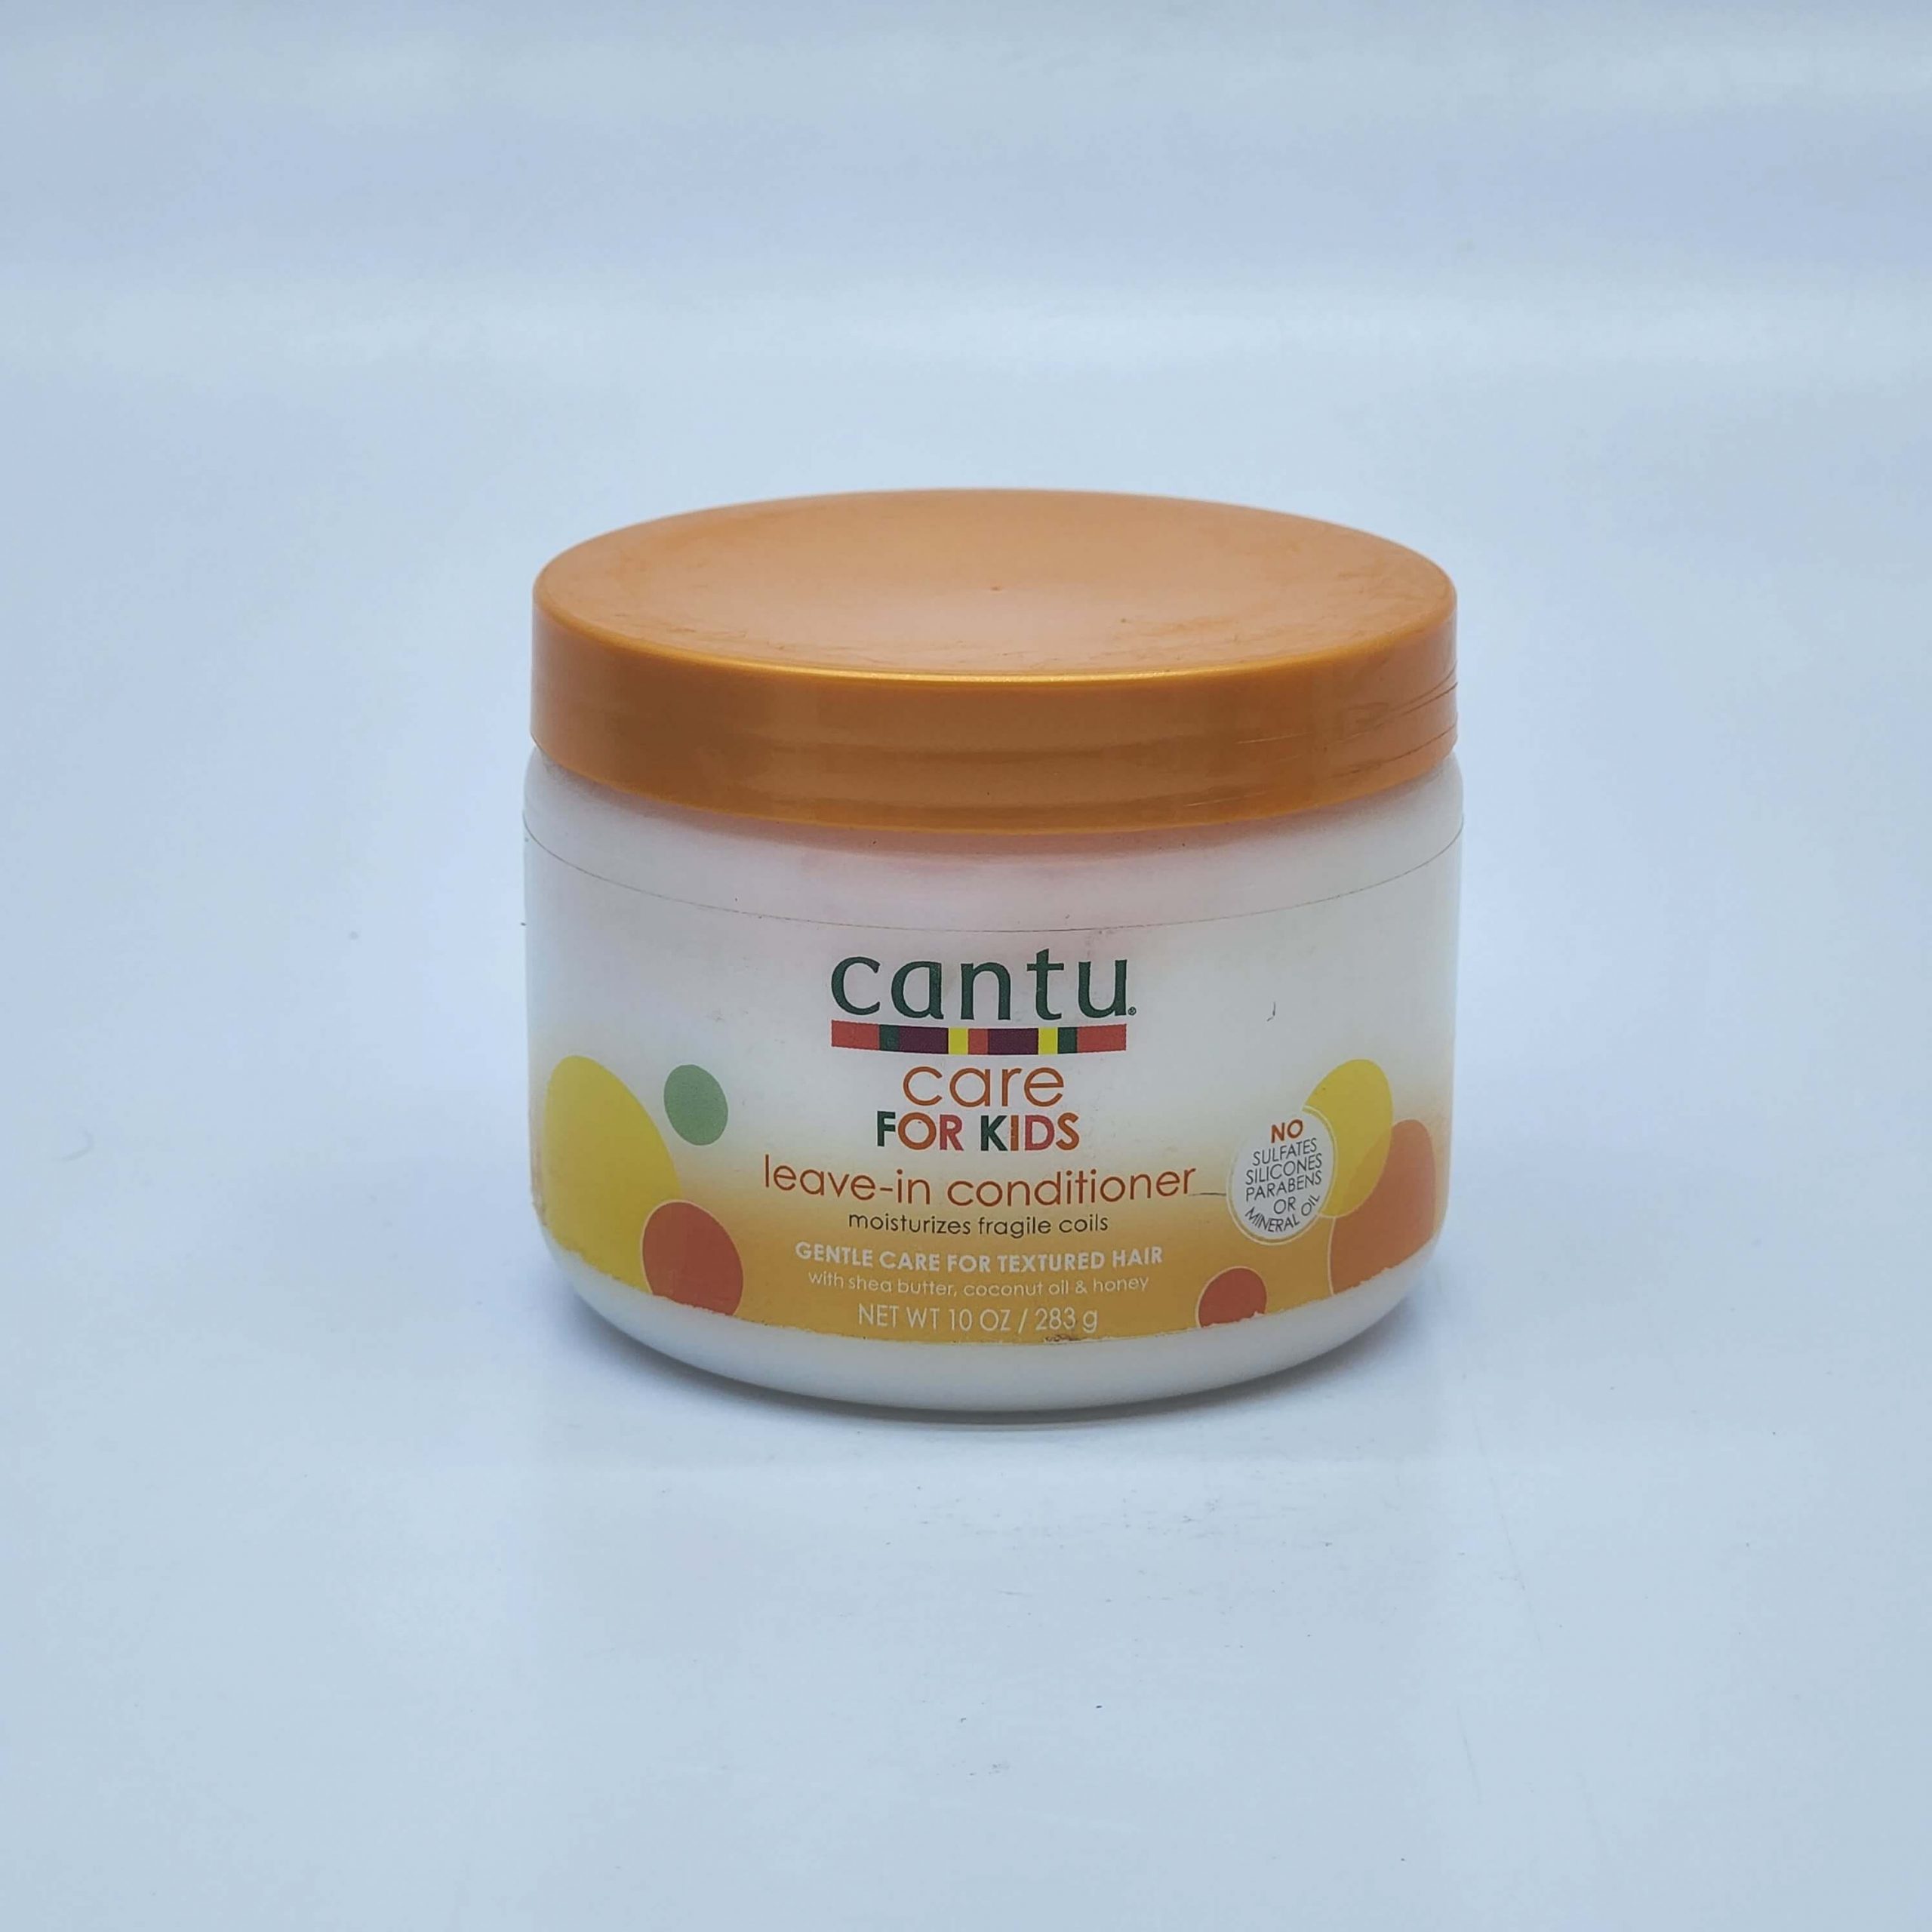 CANTU CARE FOR KIDS LEAVE-IN CONDITIONER 10 OZ